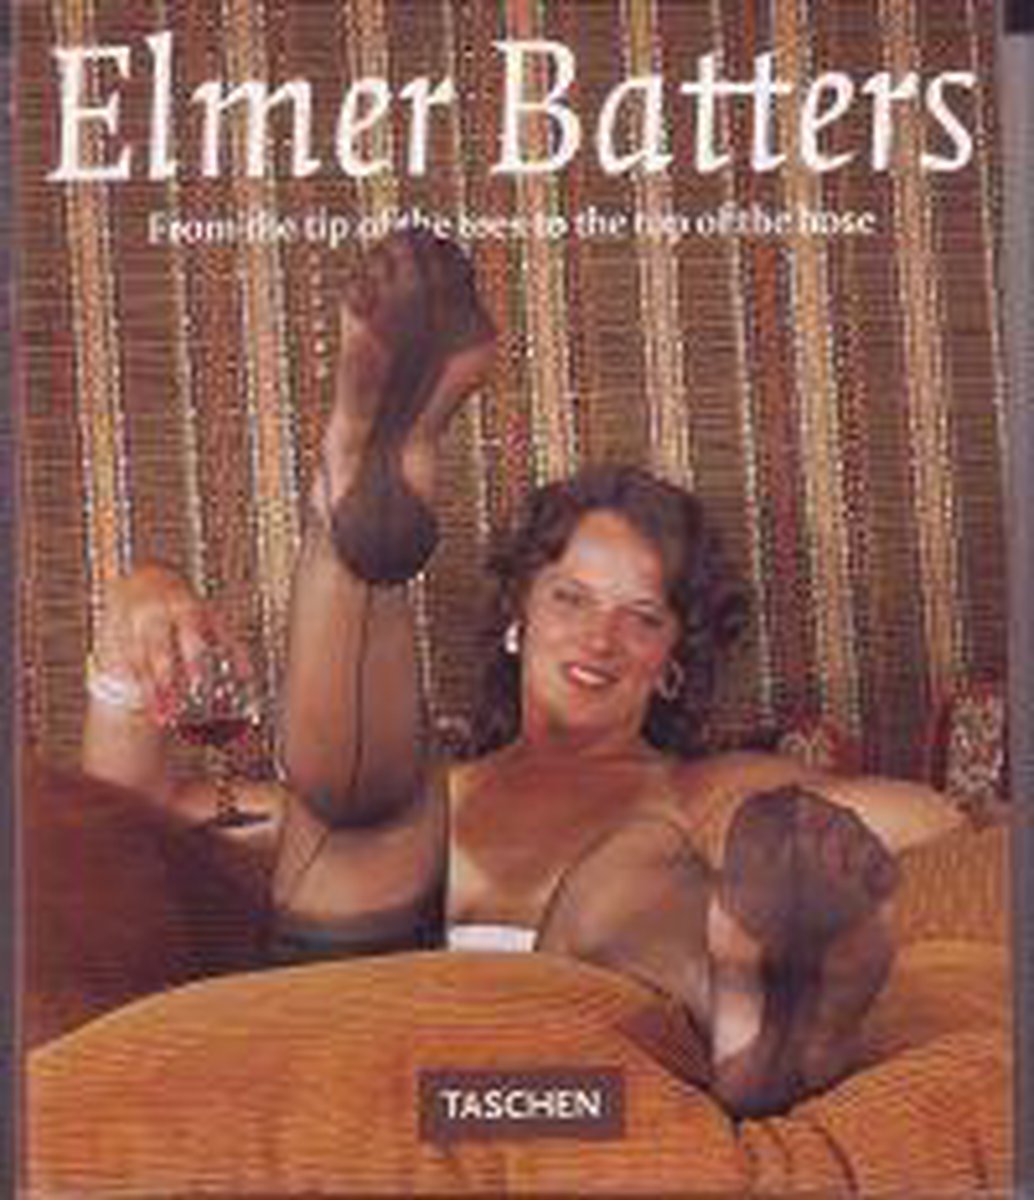 Elmer Batters: From the Tip of the Toes to the Top of the Hose